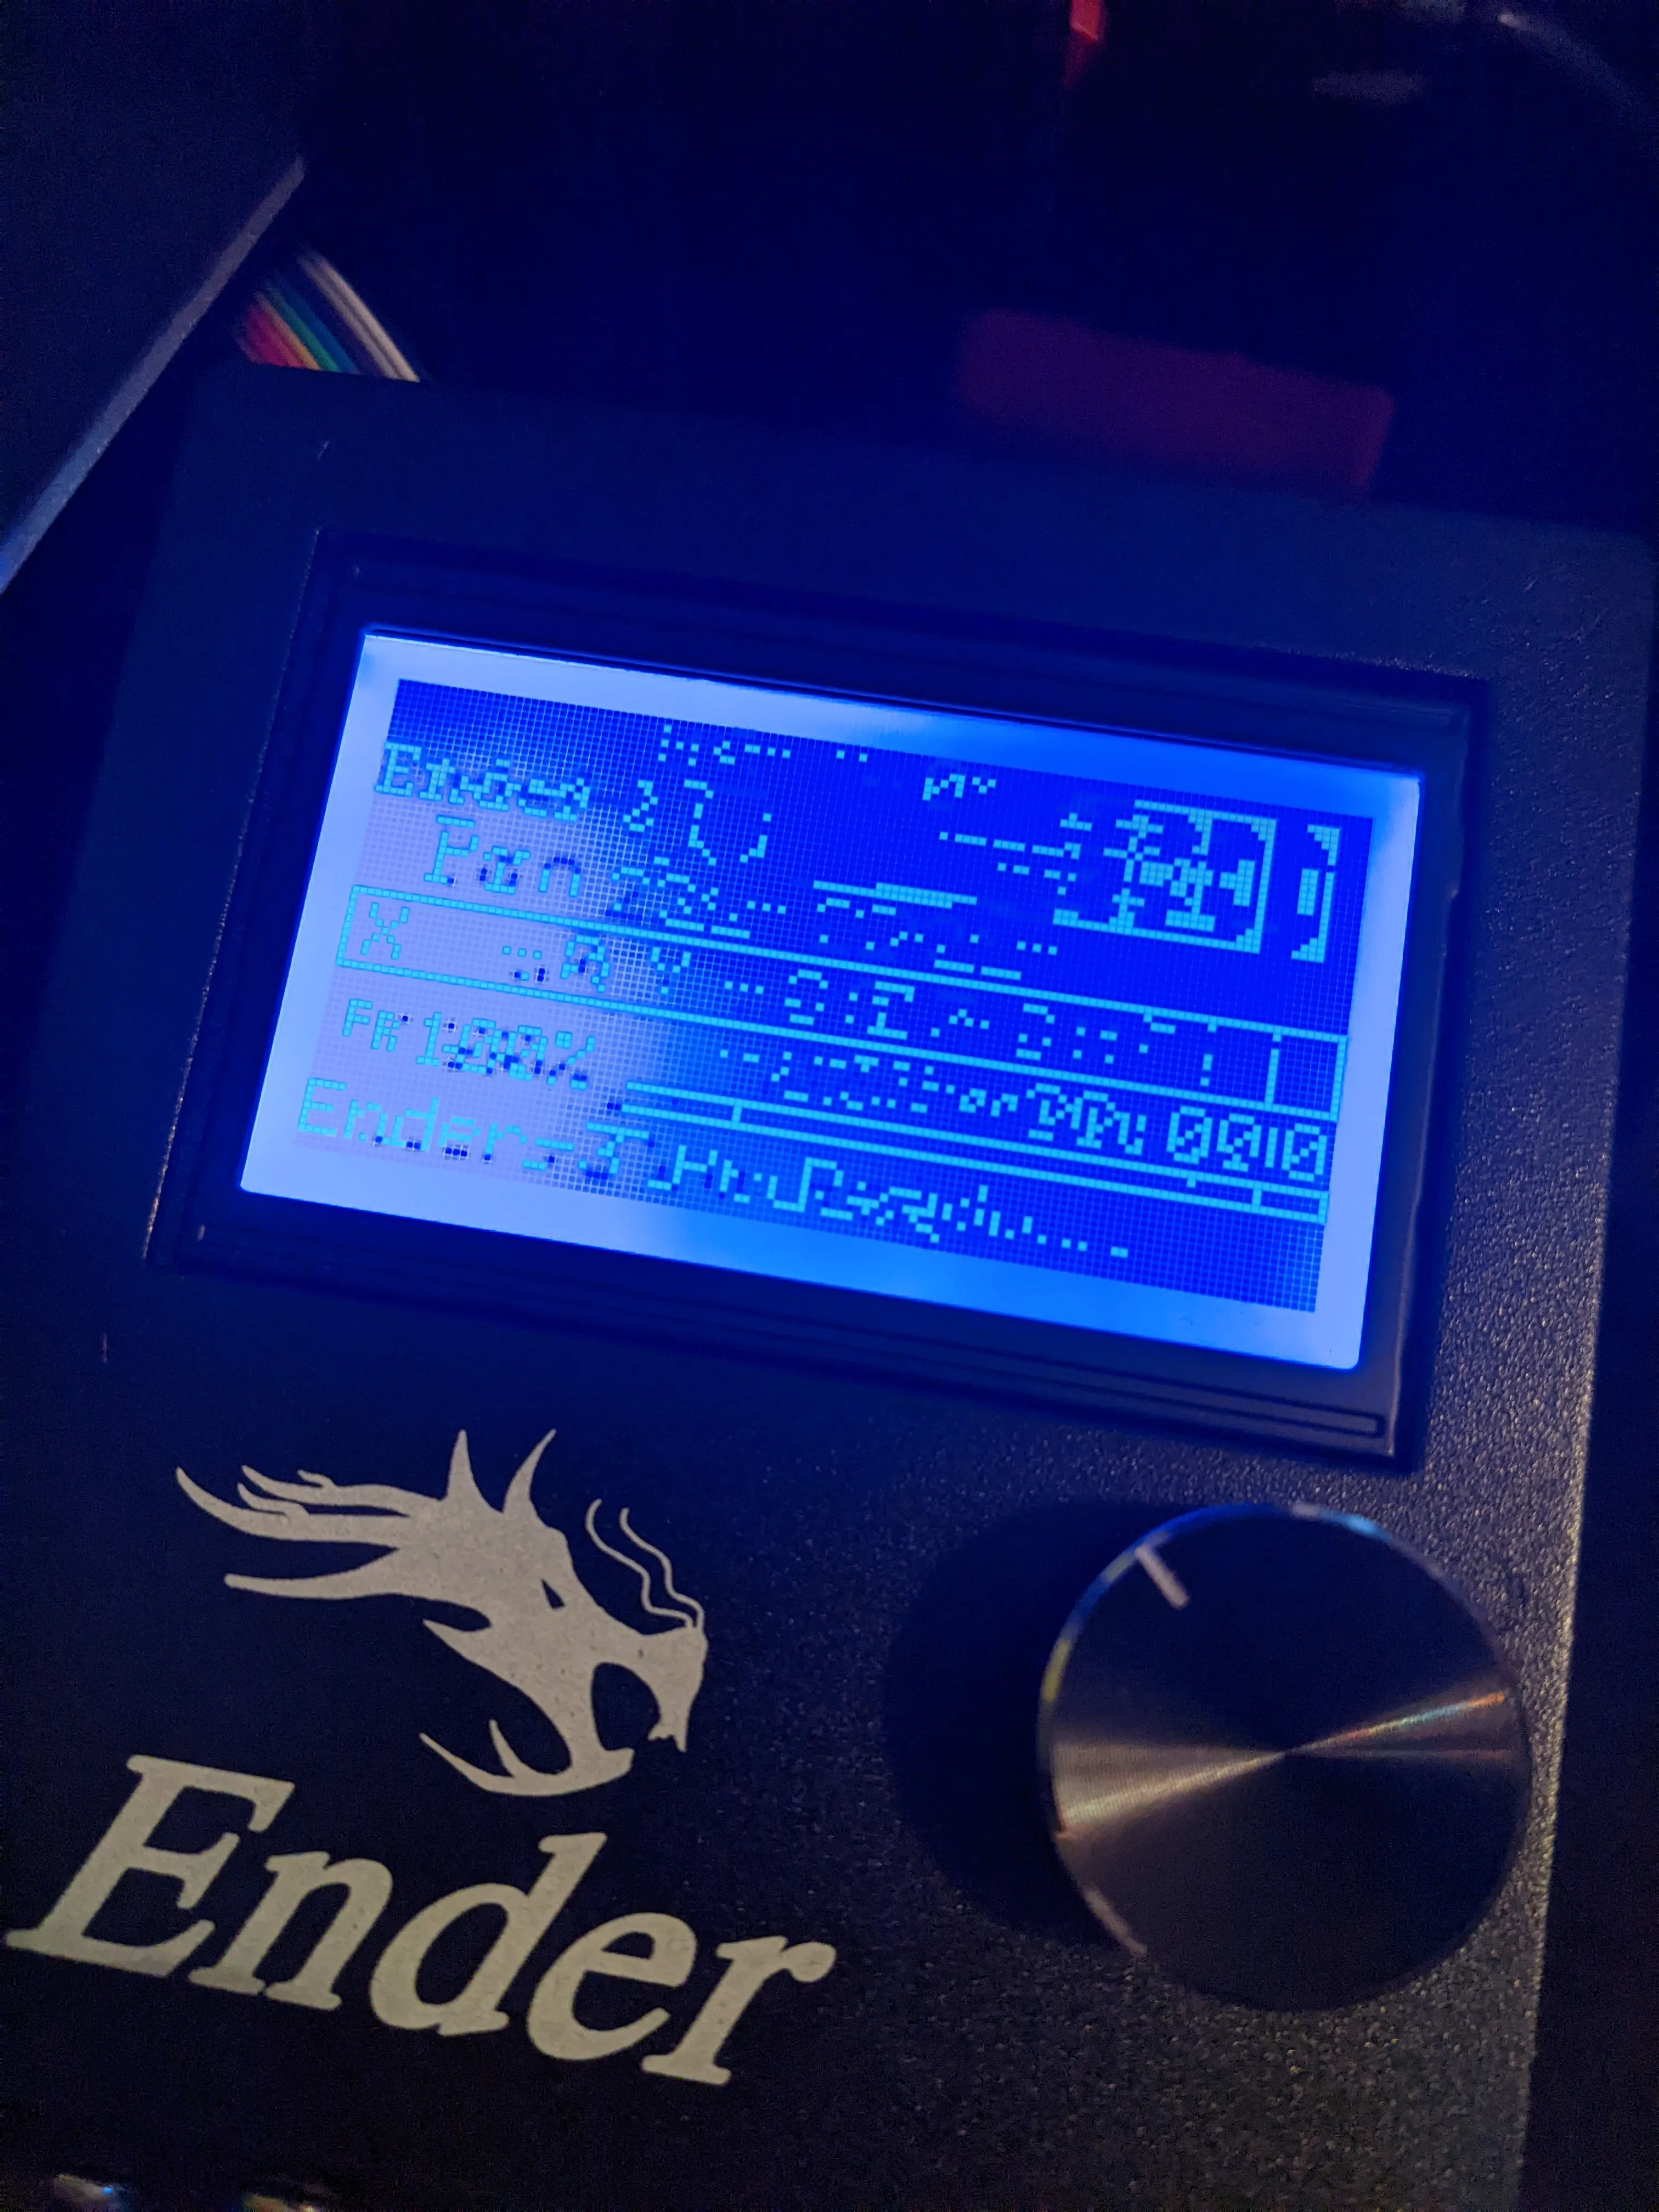 The faulty display on my last build.